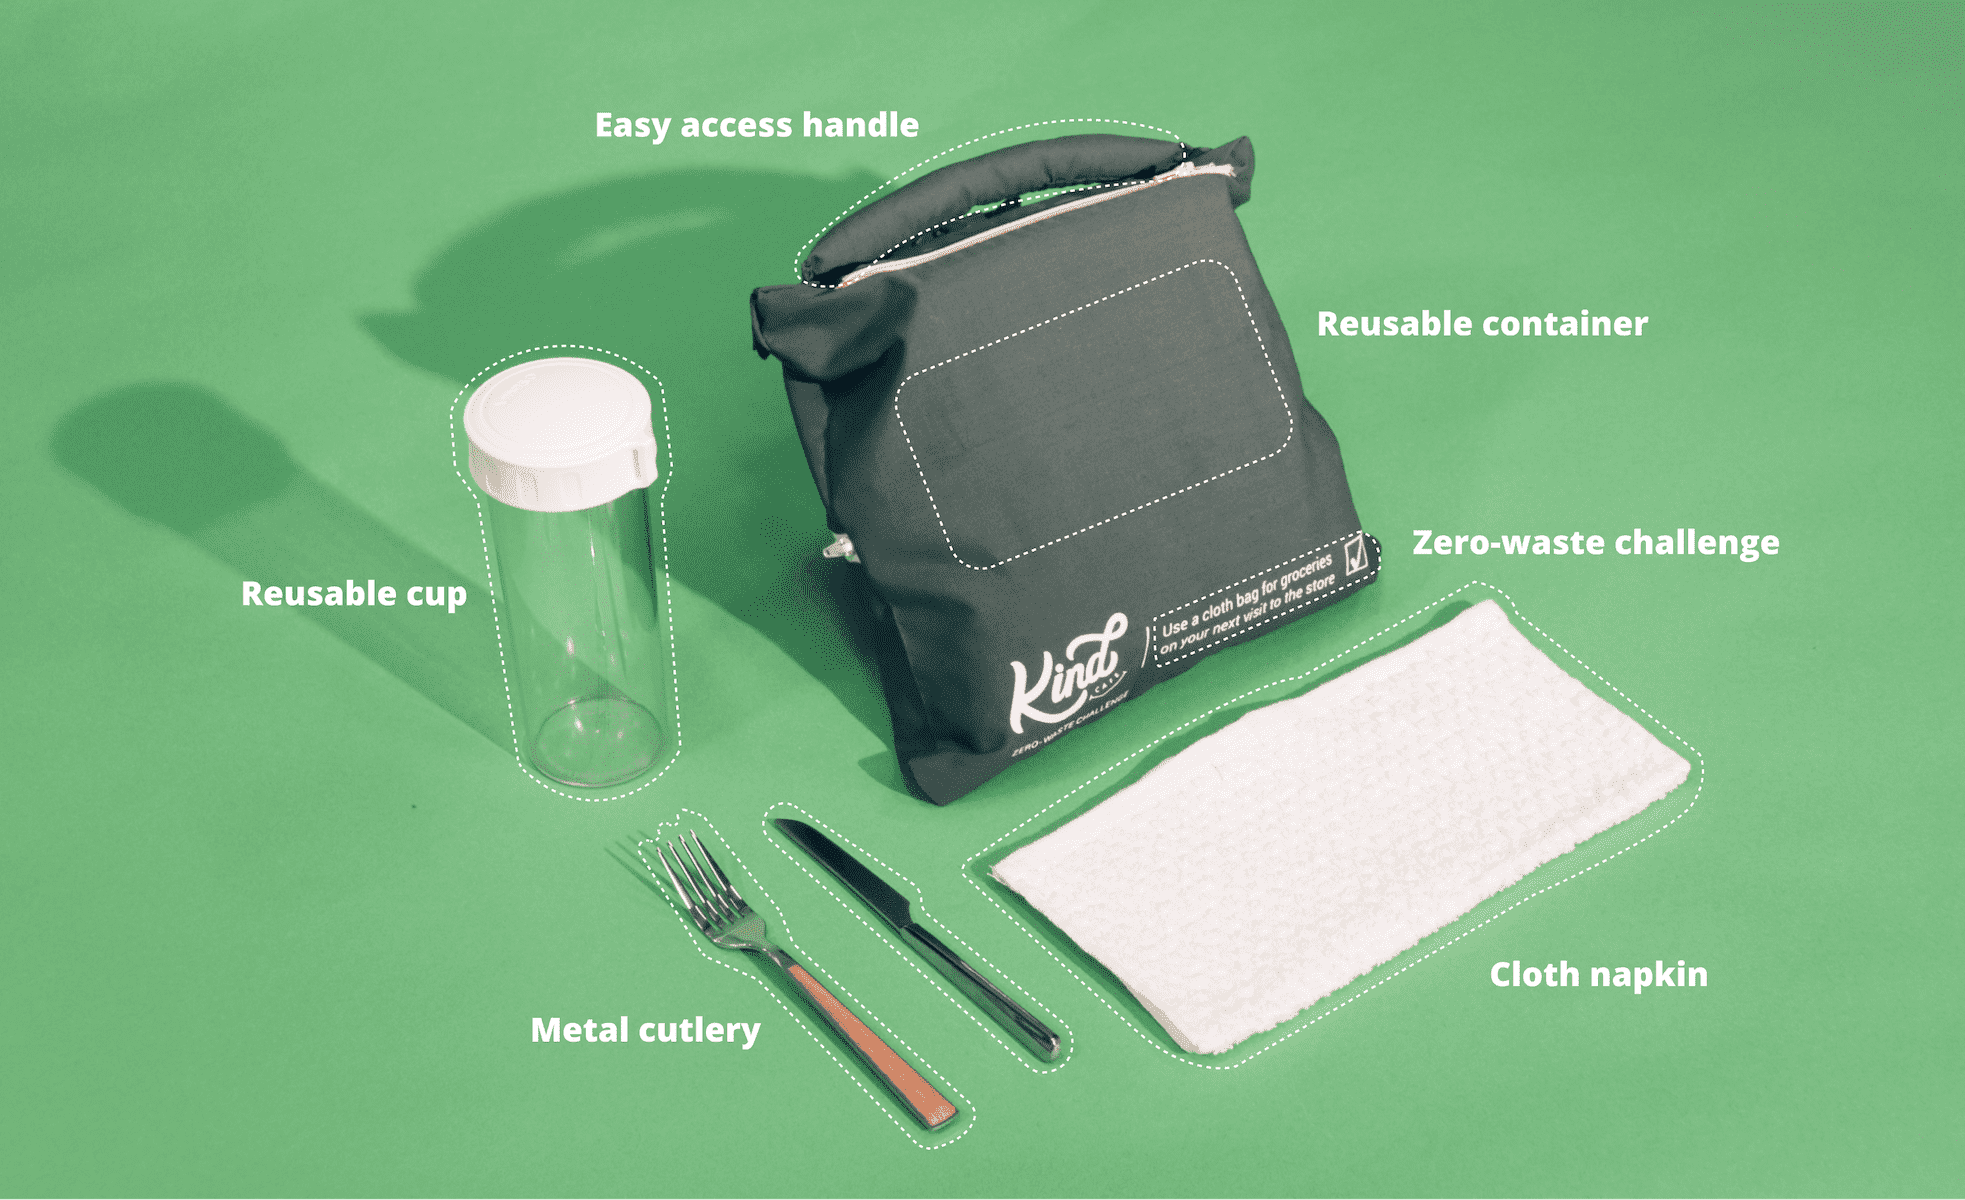 Photo of the Kindbox Kit contents (cup, container, utensils and towel napkin)